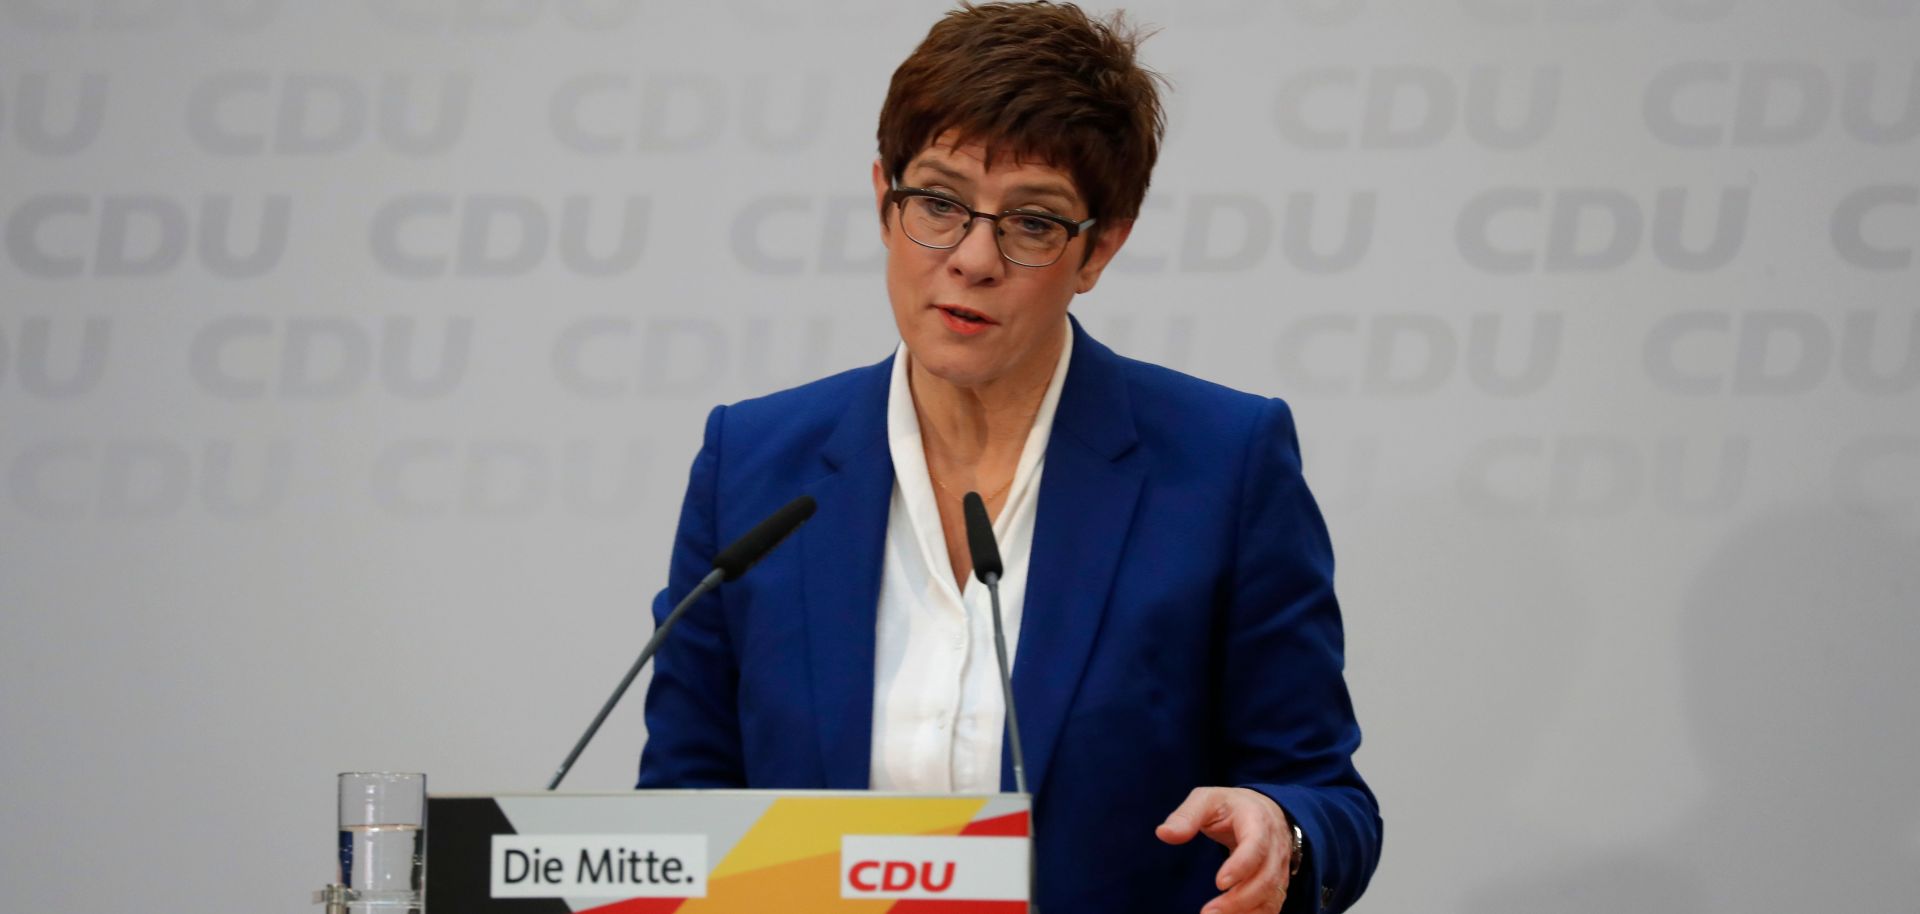 This photo show former German Christian Democratic Union party leader Annegret Kramp-Karrenbauer, who resigned earlier in February.